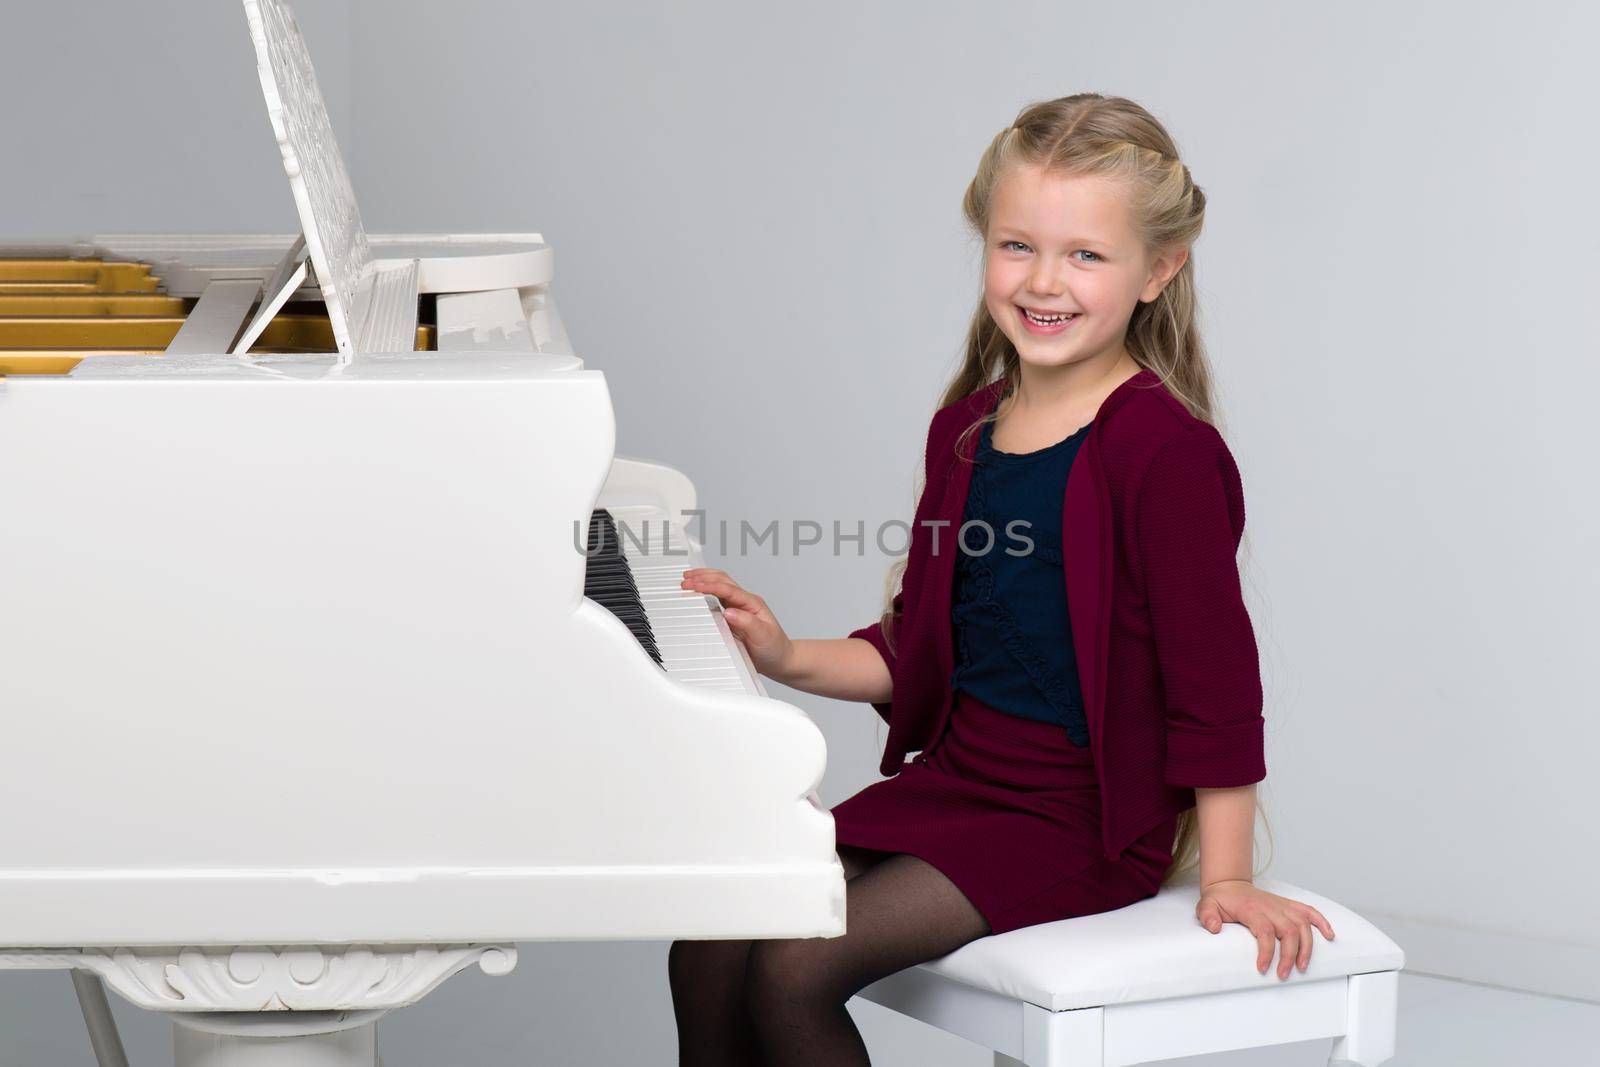 Smiling girl playing the piano. Close-up portrait of adorable long-haired little girl sitting at the white piano. Cute child happily learning to play a musical instrument